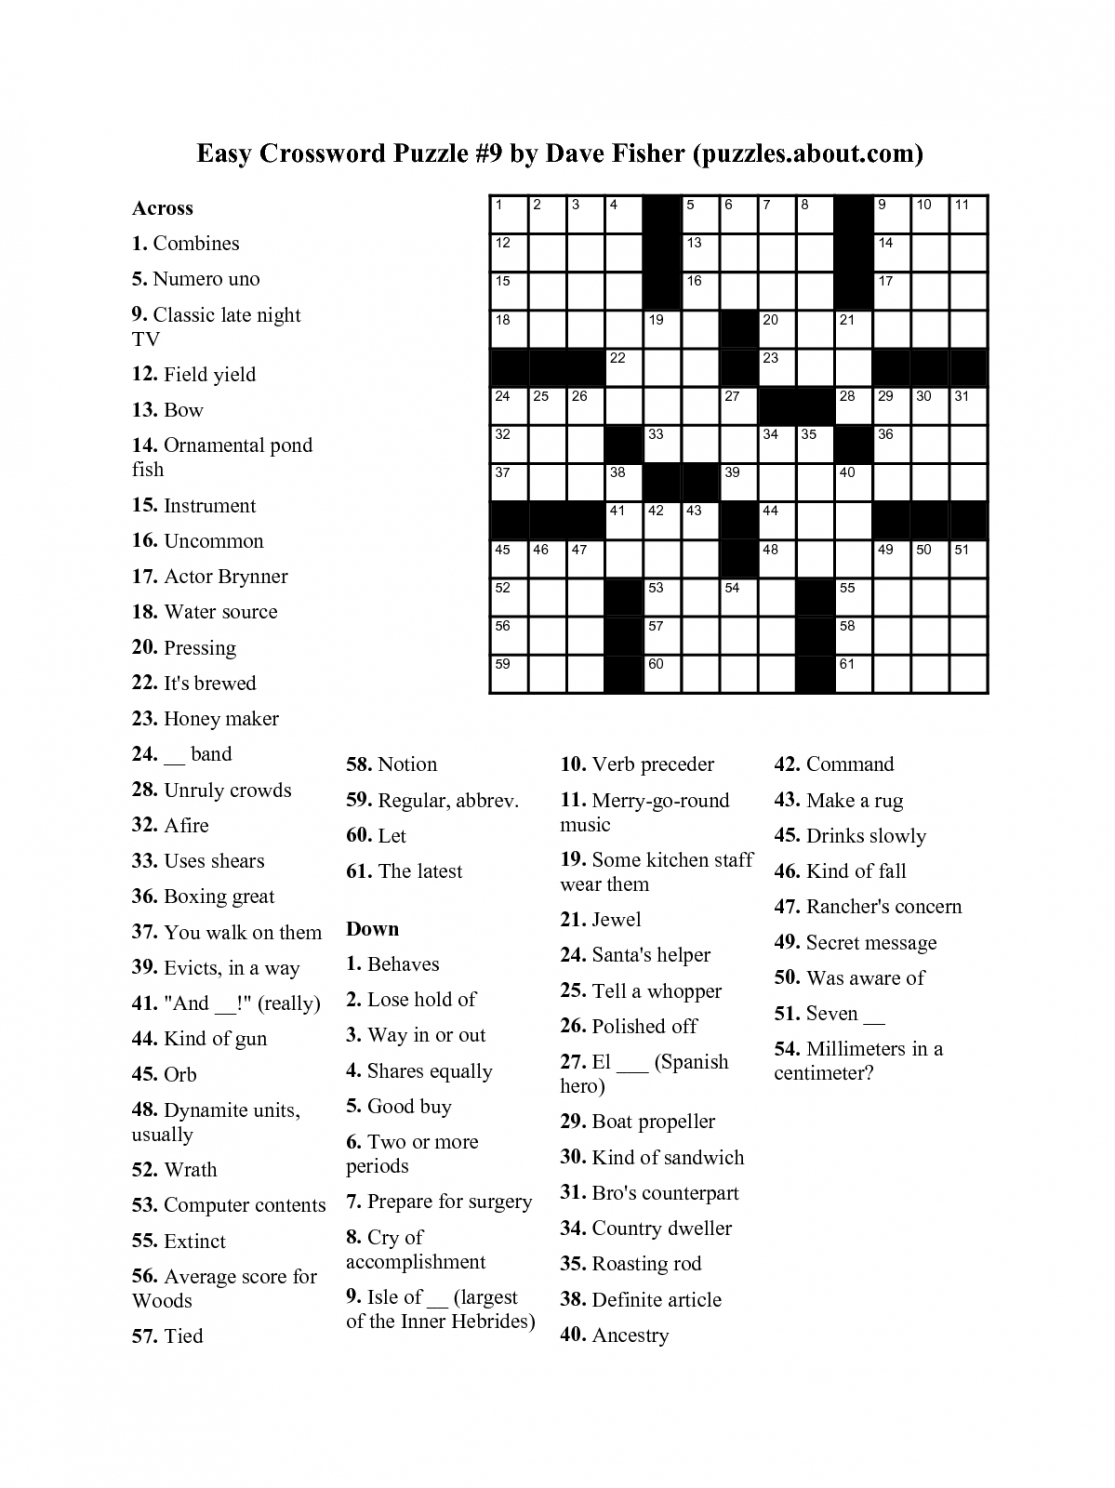 Easy Printable Crossword Puzzles For Kids | Penaime - Free Easy Printable Crossword Puzzles For Kids